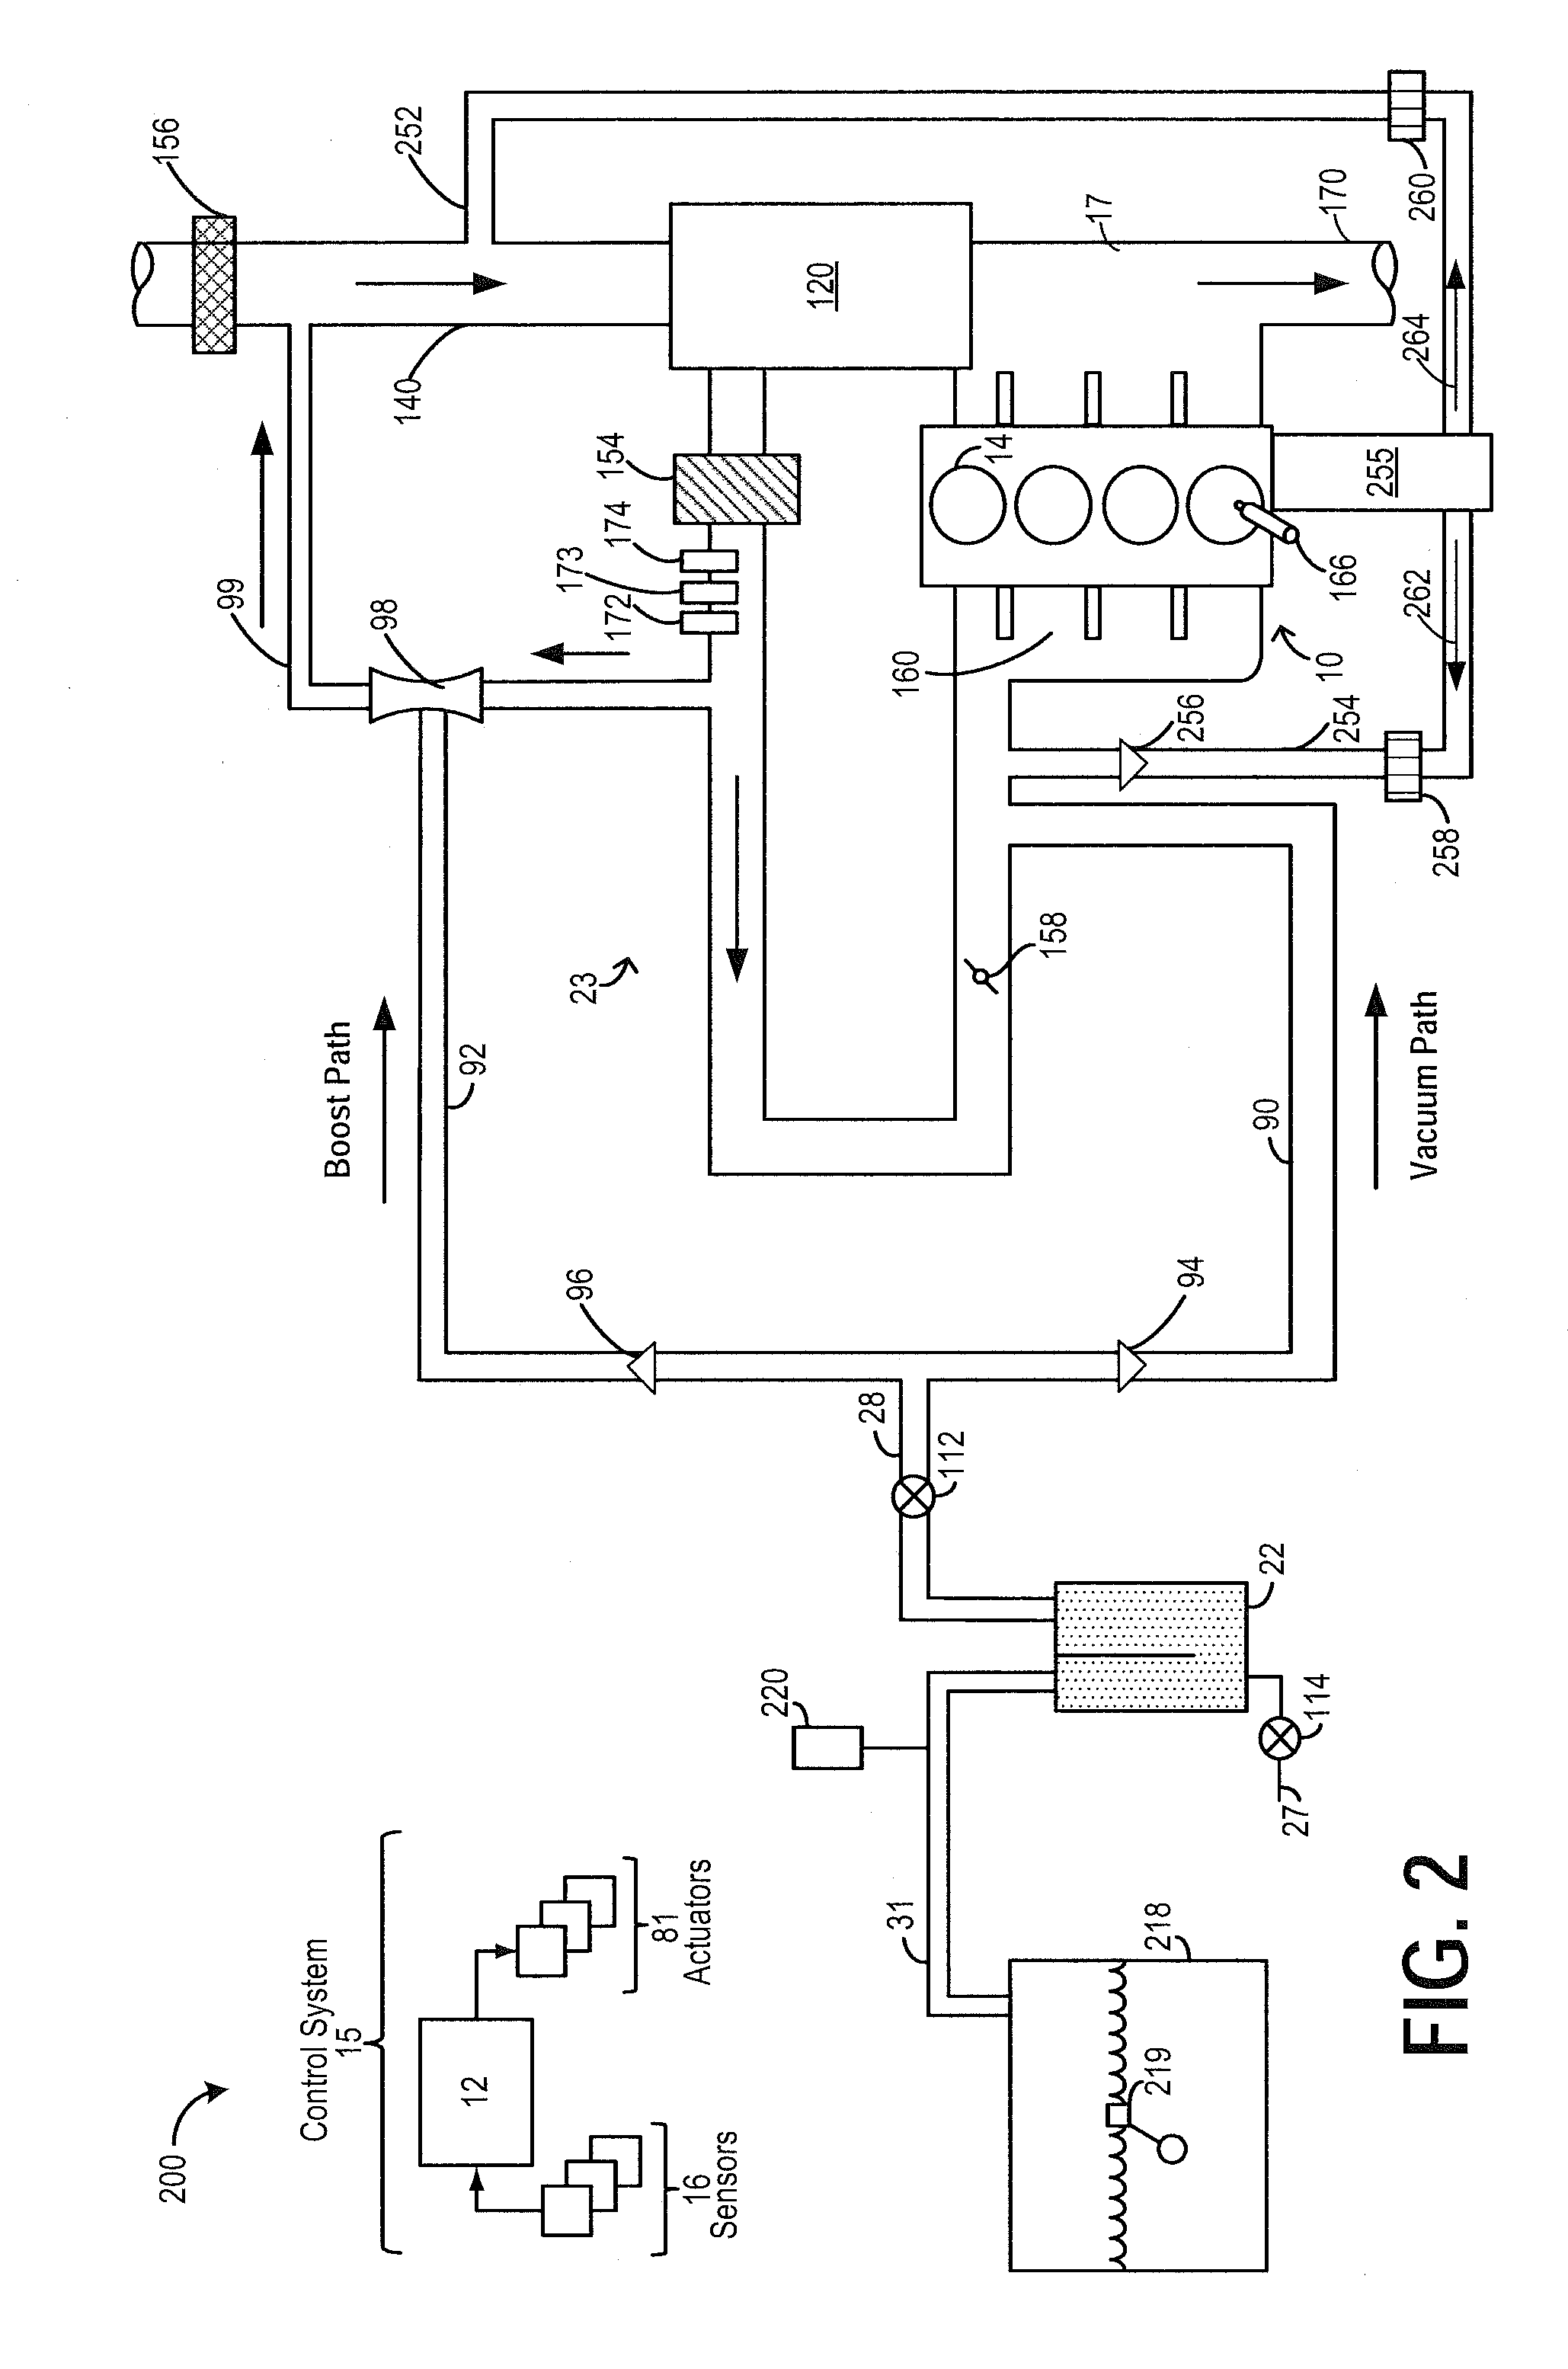 Methods and systems for an intake oxygen sensor